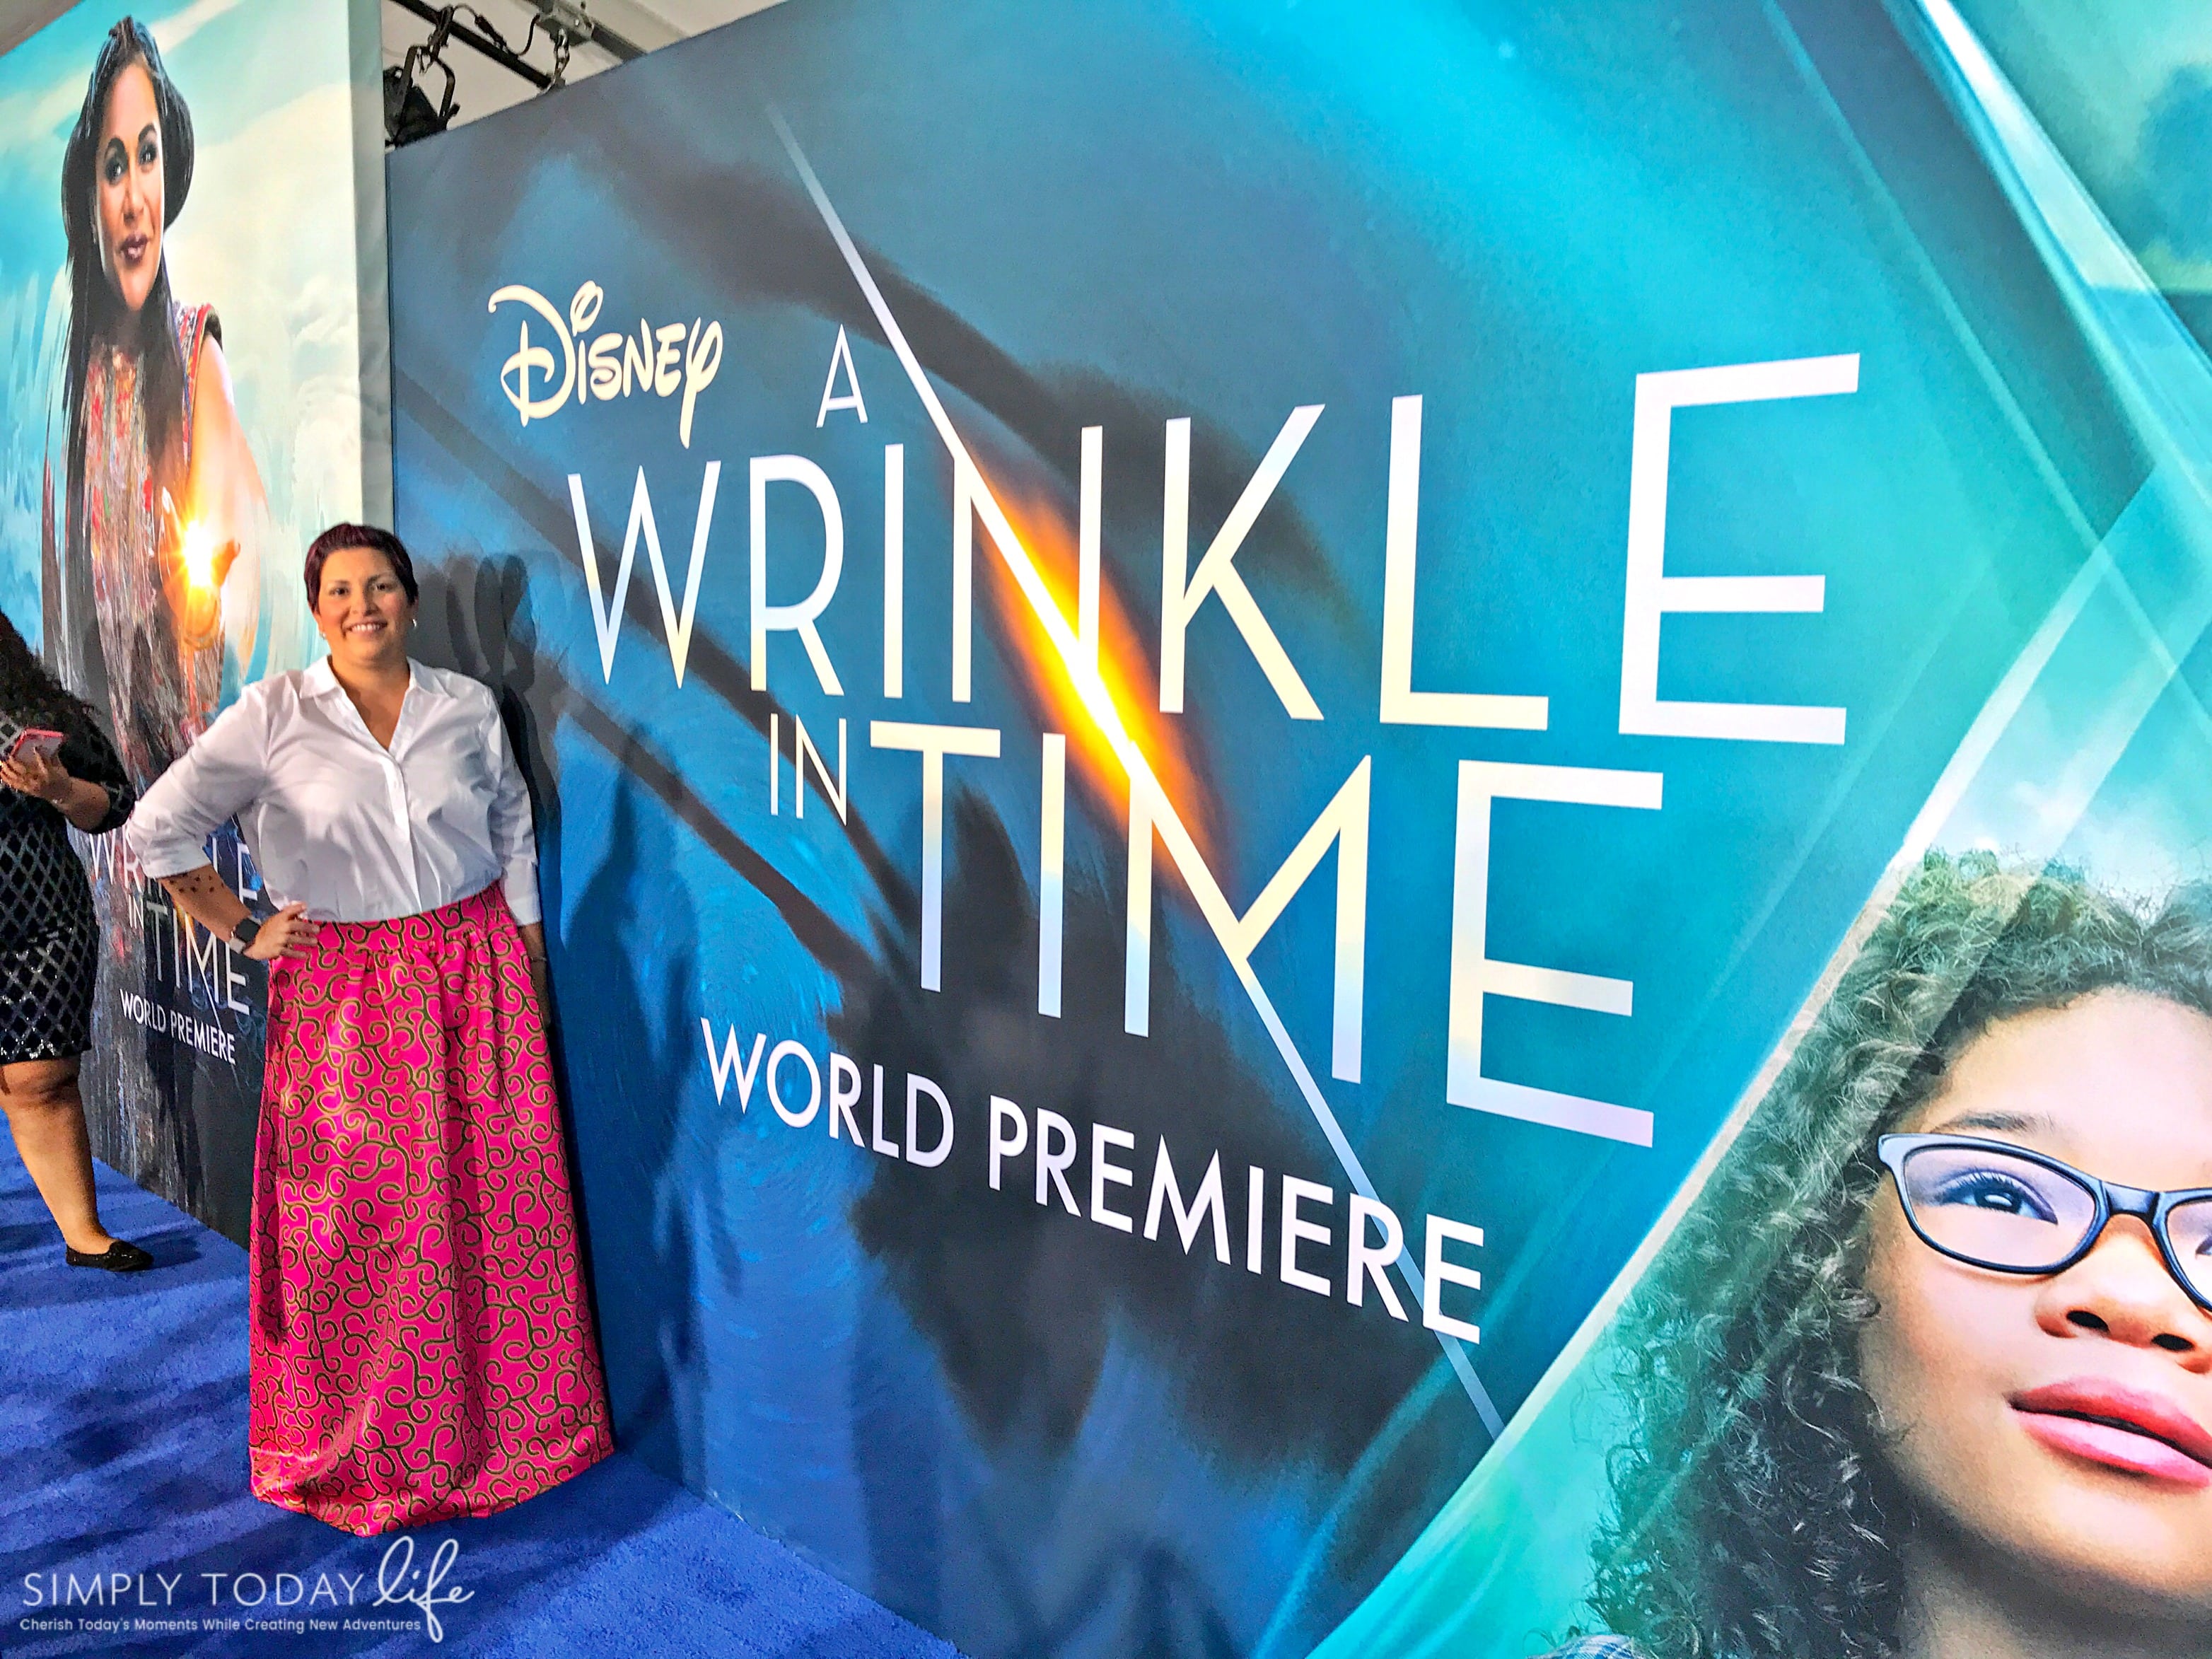 A Wrinkle In Time World Movie Premiere Photo - simplytodaylife.com